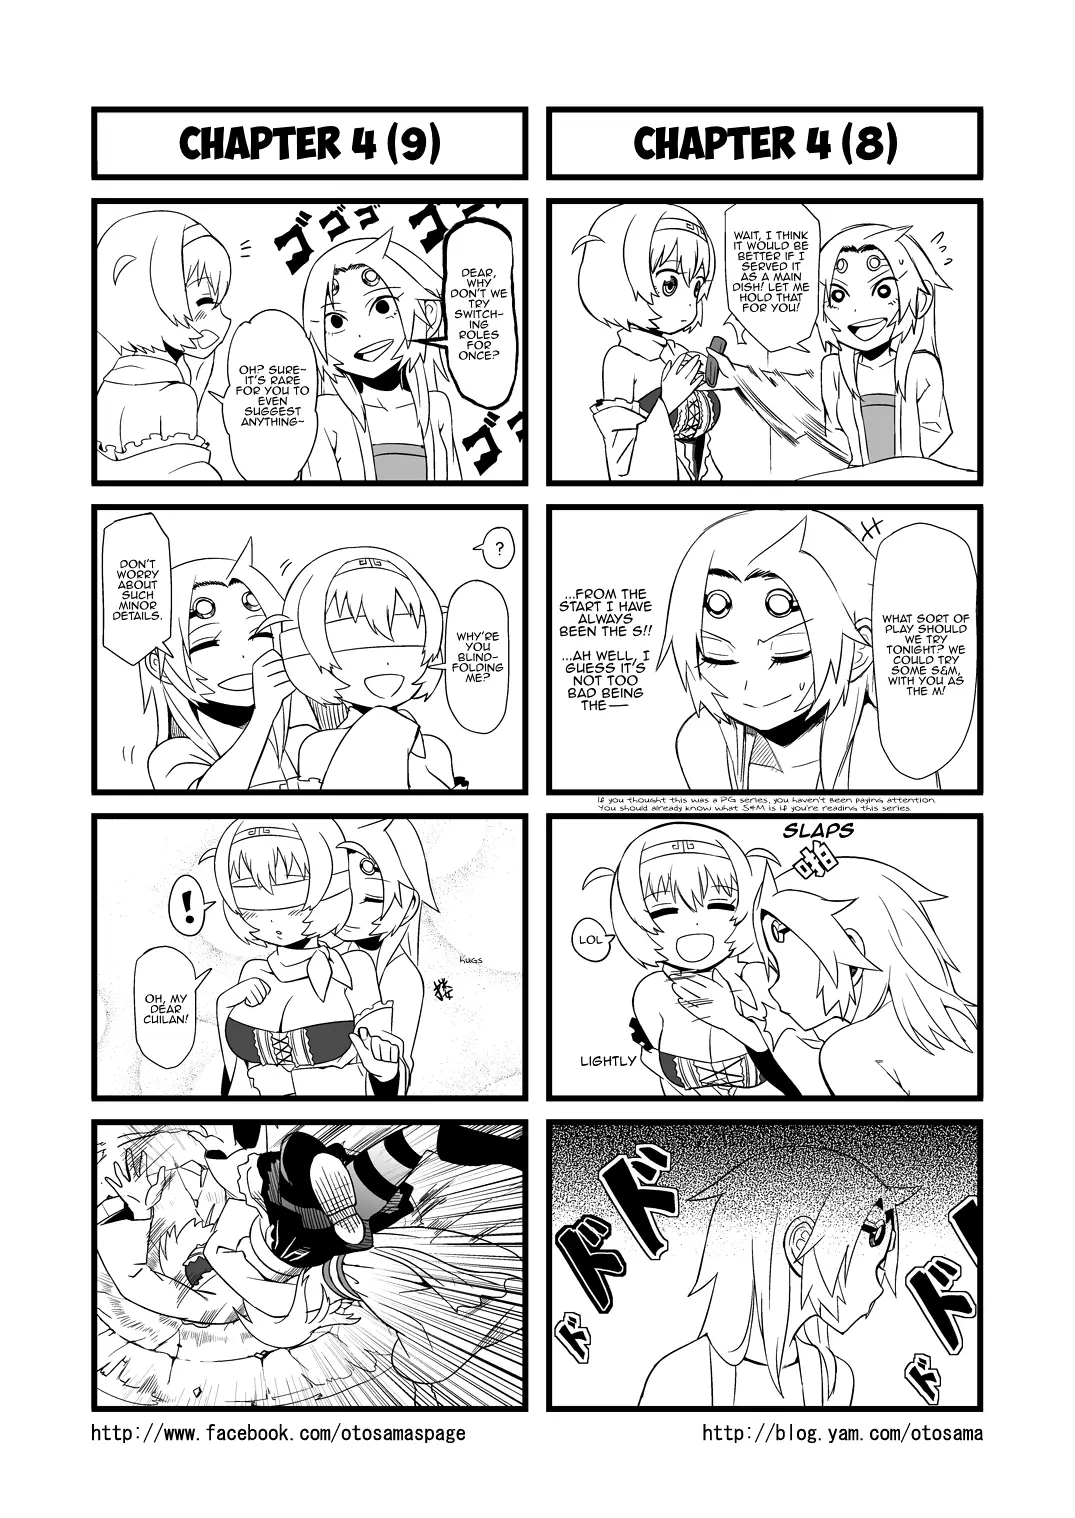 Tang Hill Burial - Journey To The West Irresponsible Anything Goes Edition - 4 page 5